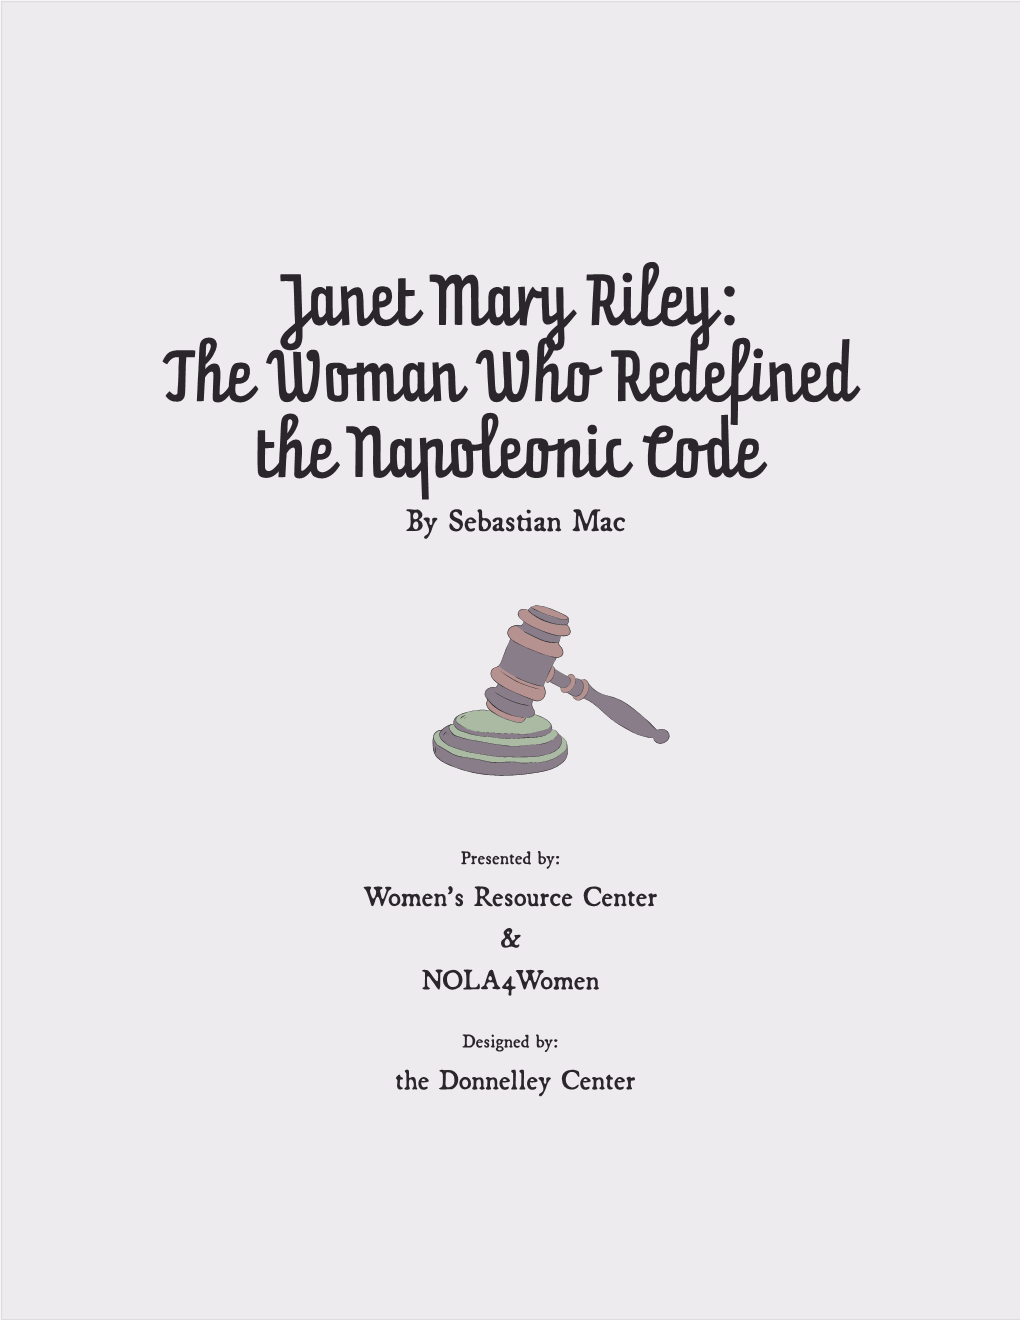 Janet Mary Riley: the Woman Who Redefined the Napoleonic Code by Sebastian Mac